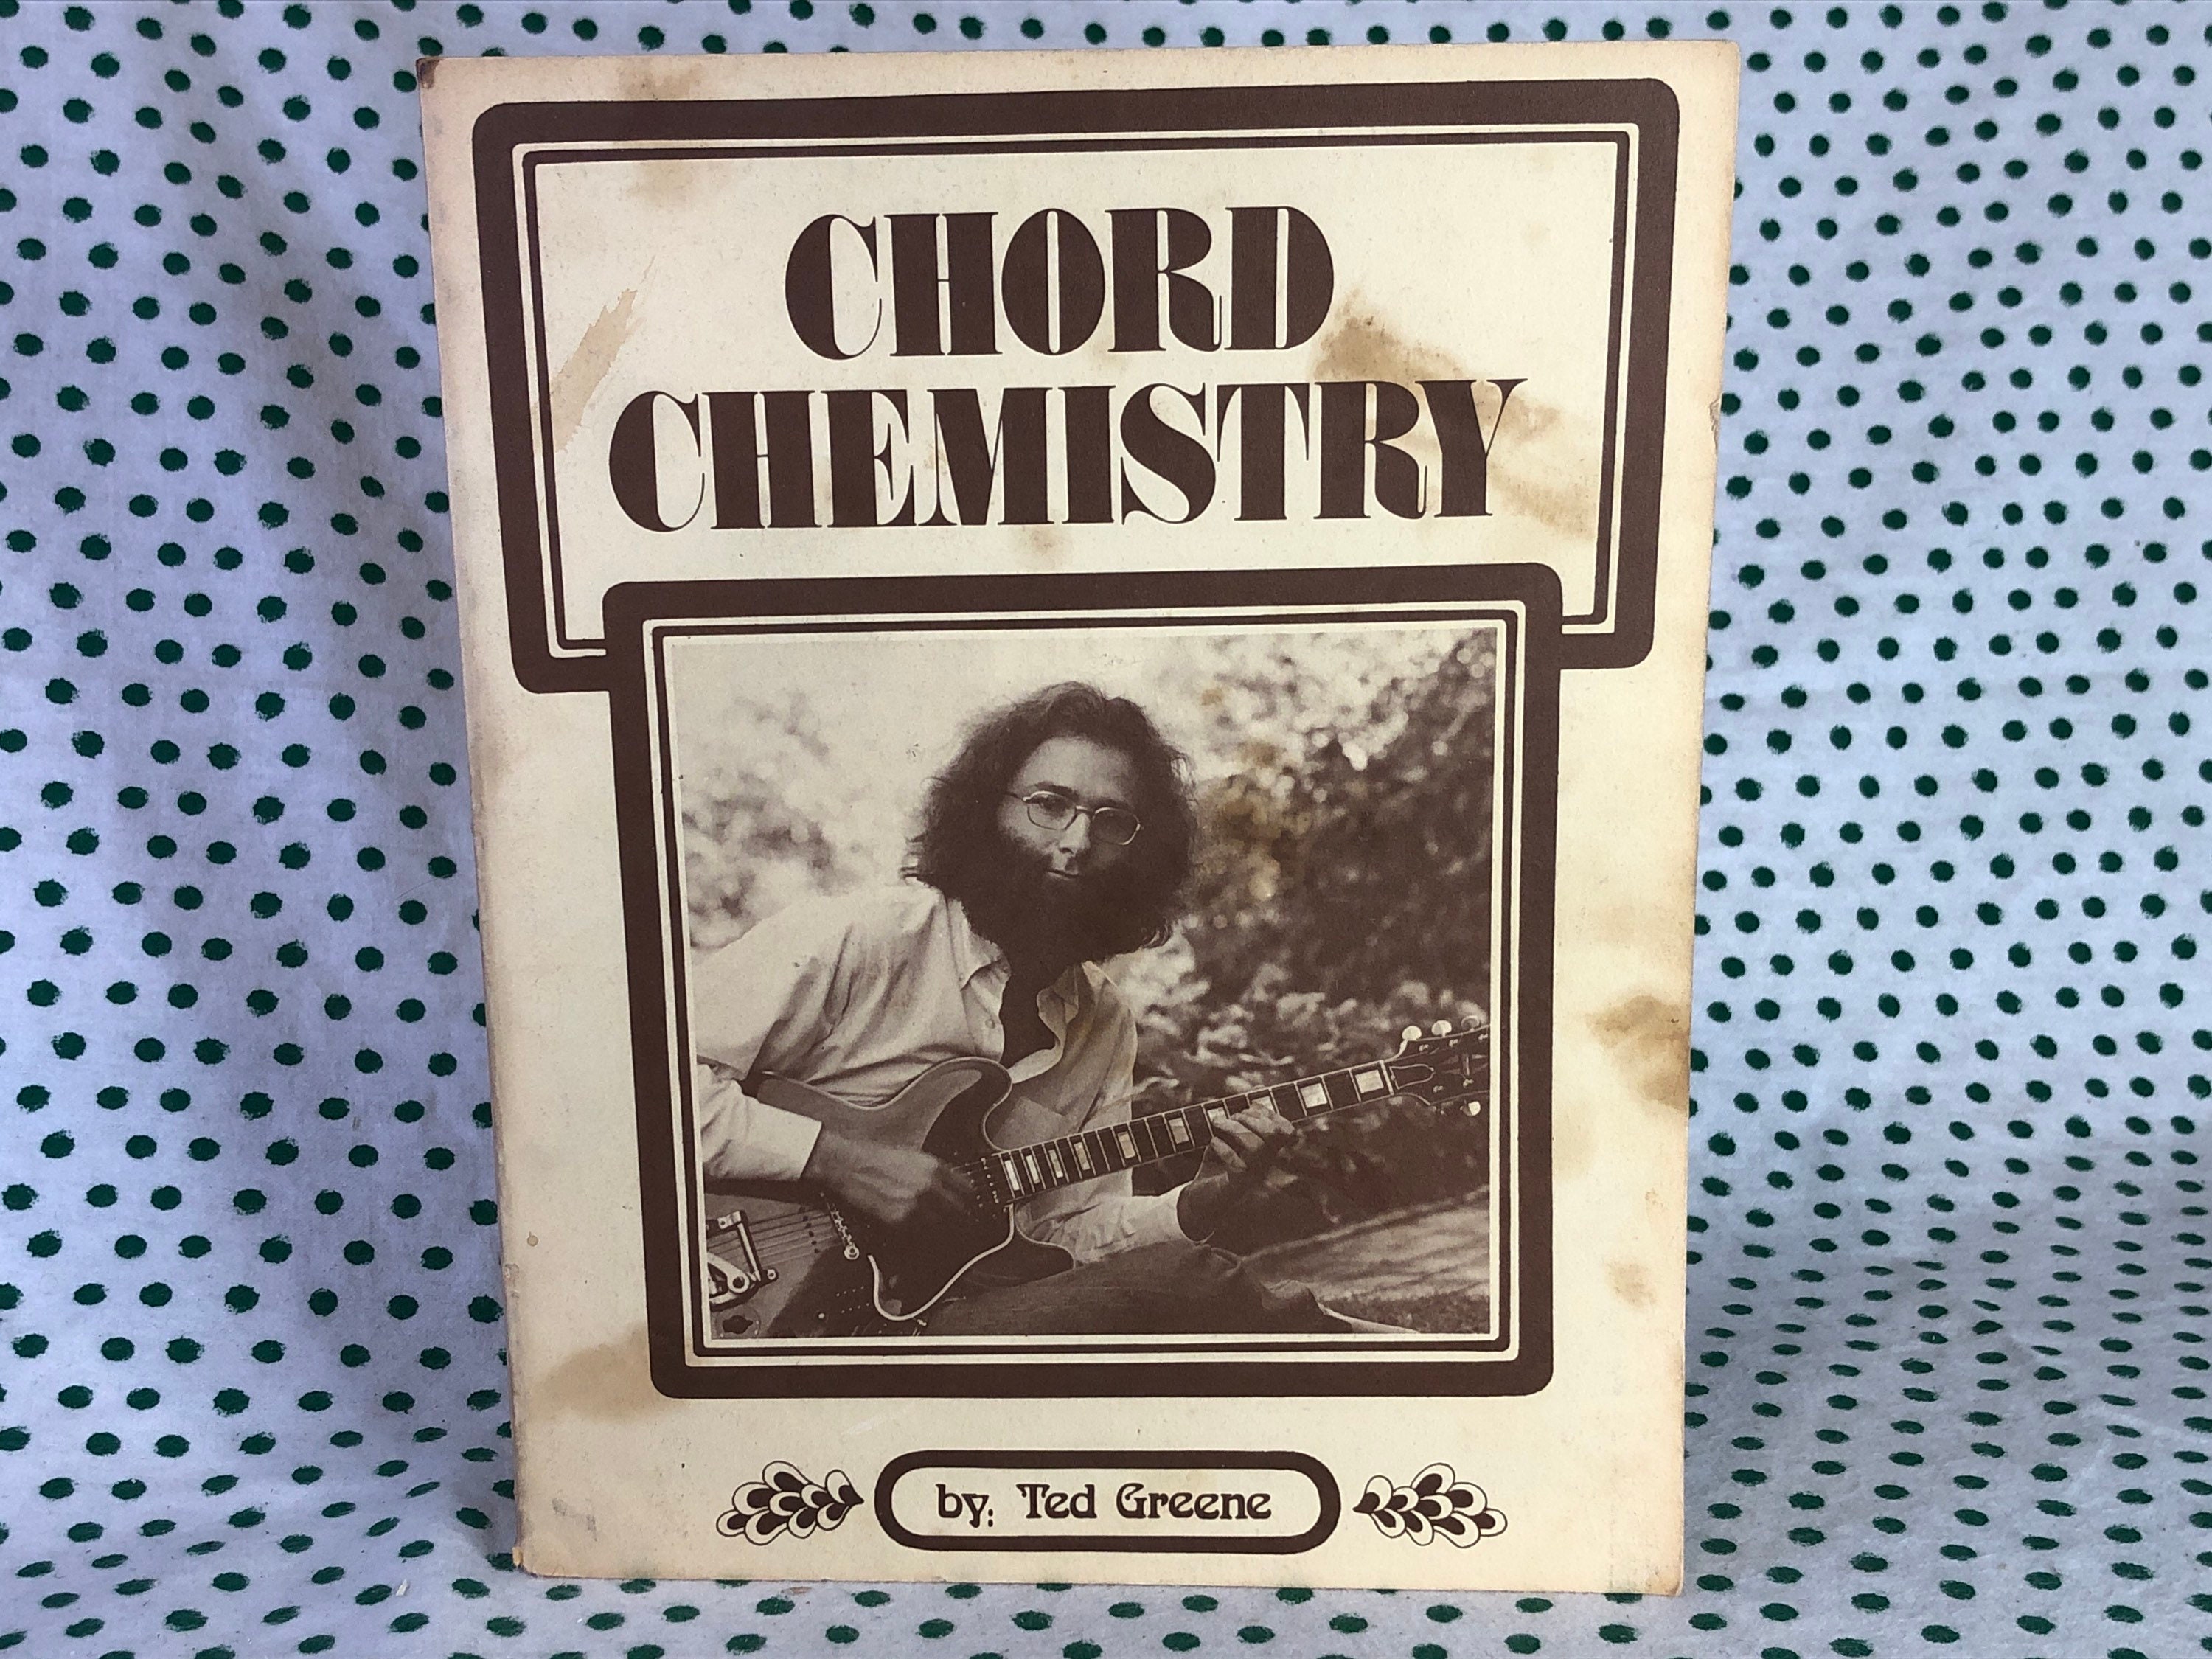 Chord Chemistry by Ted Greene pic image